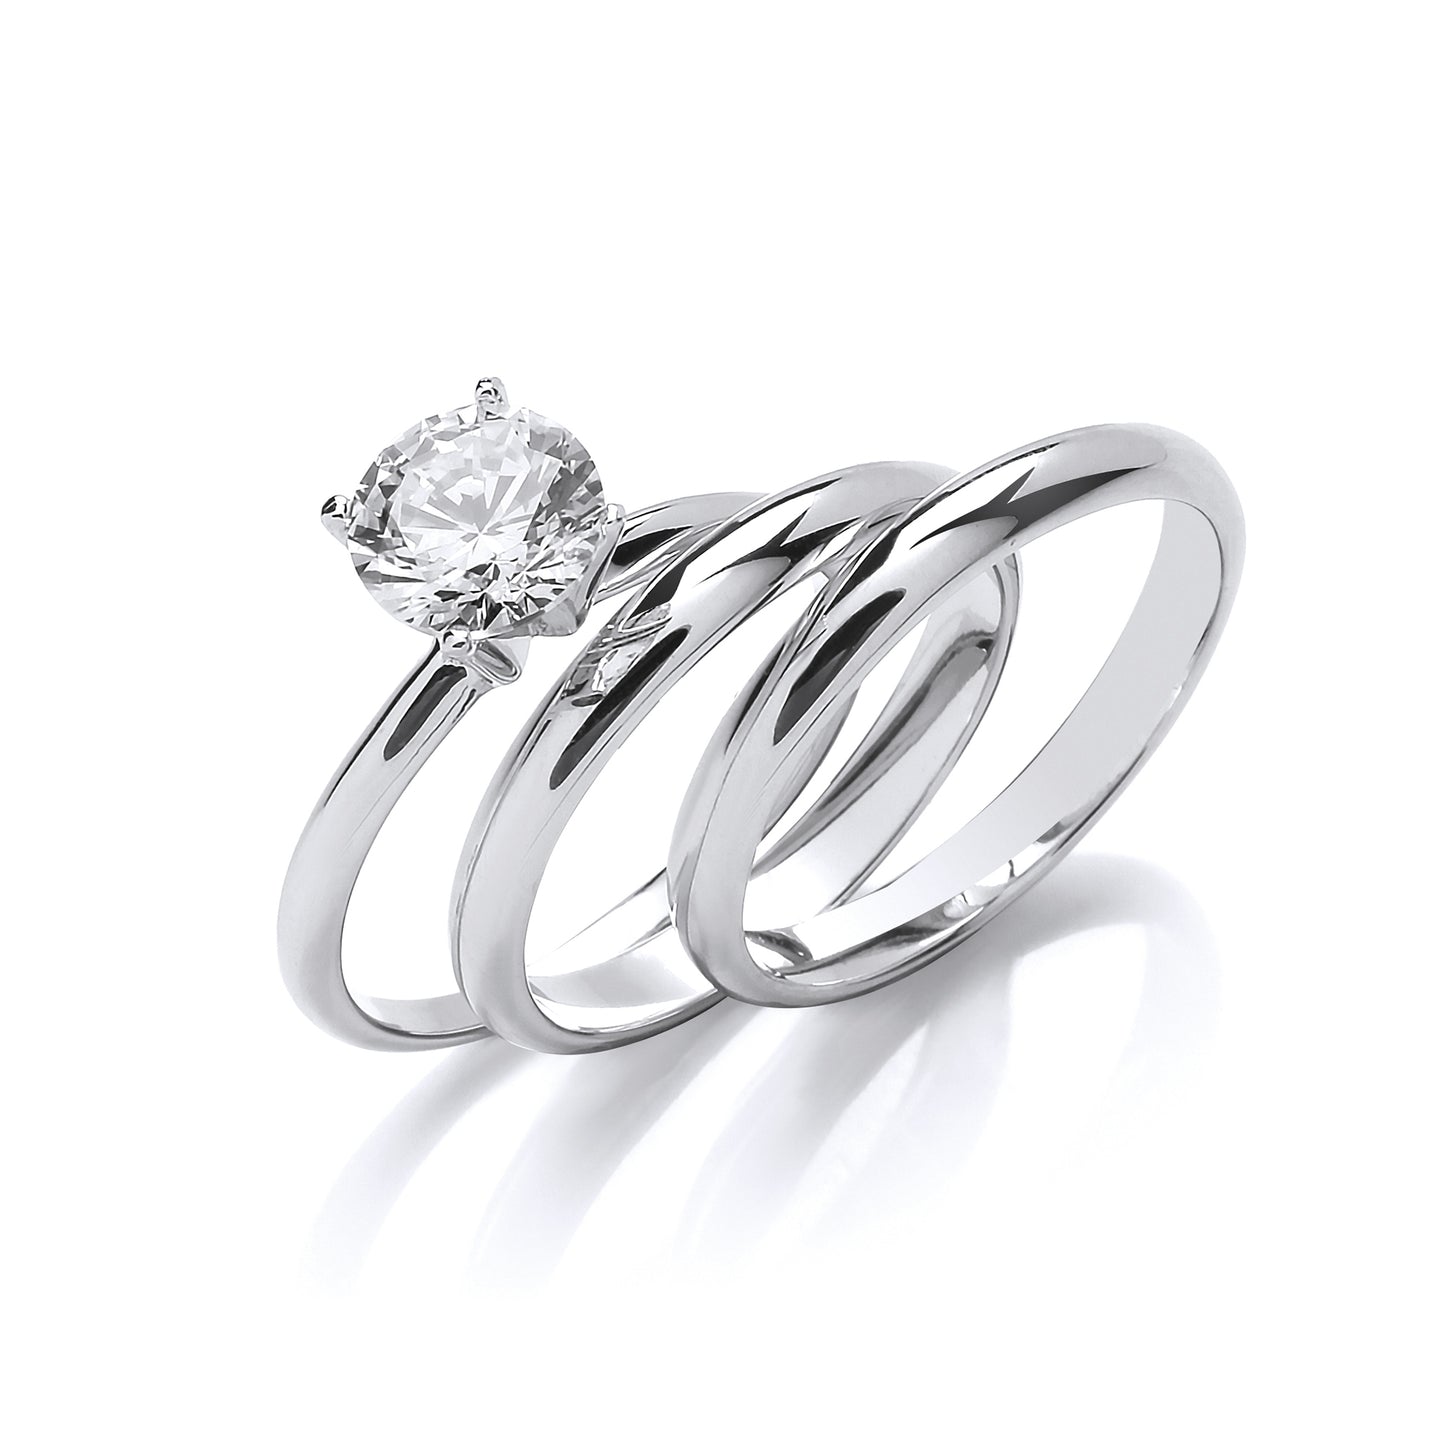 Silver  CZ Solitaire Triple Band Bridal Rings Set - GVR852